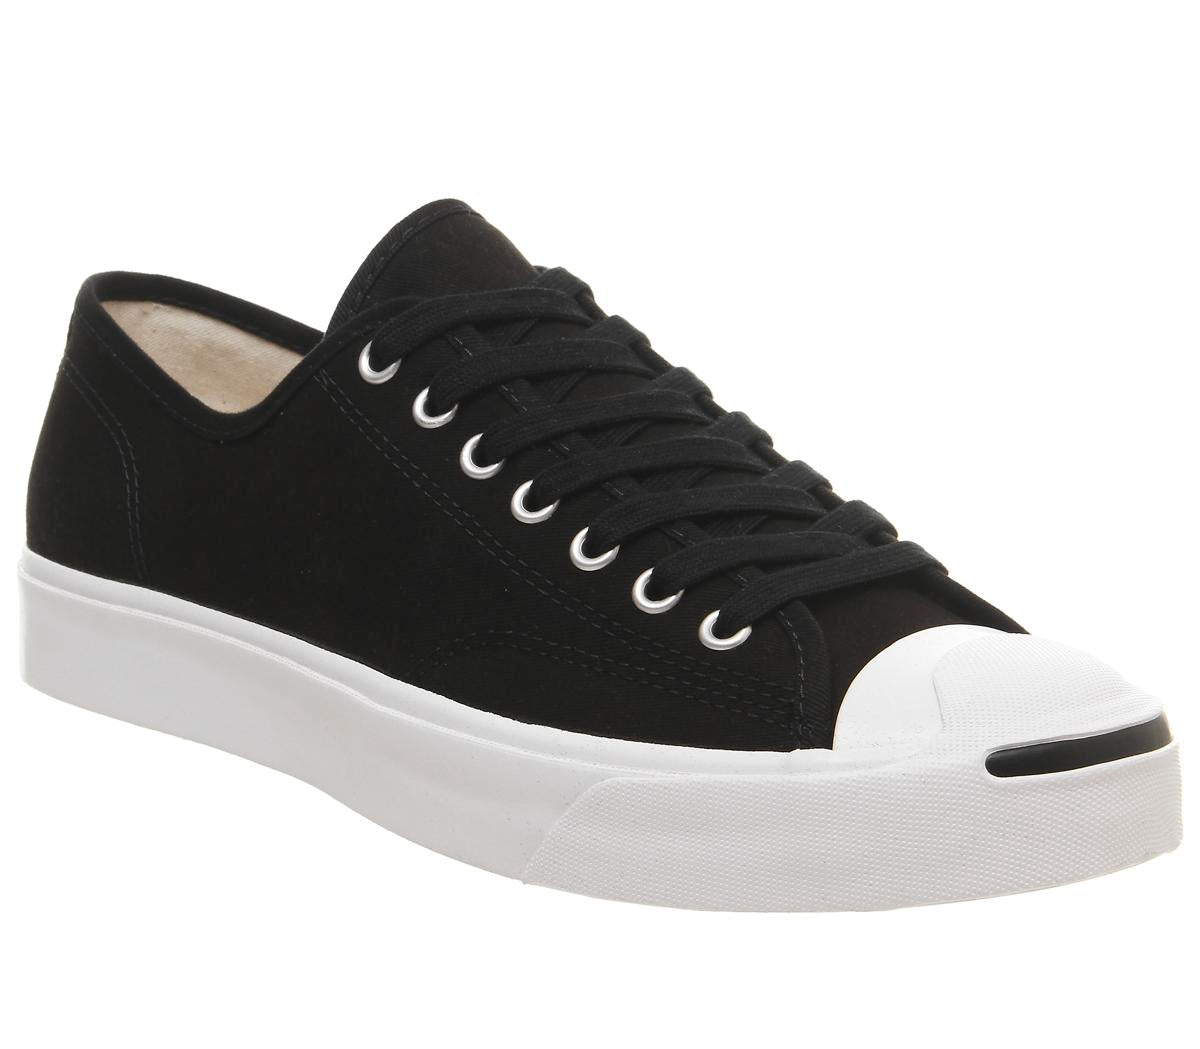 converse jack purcell black white